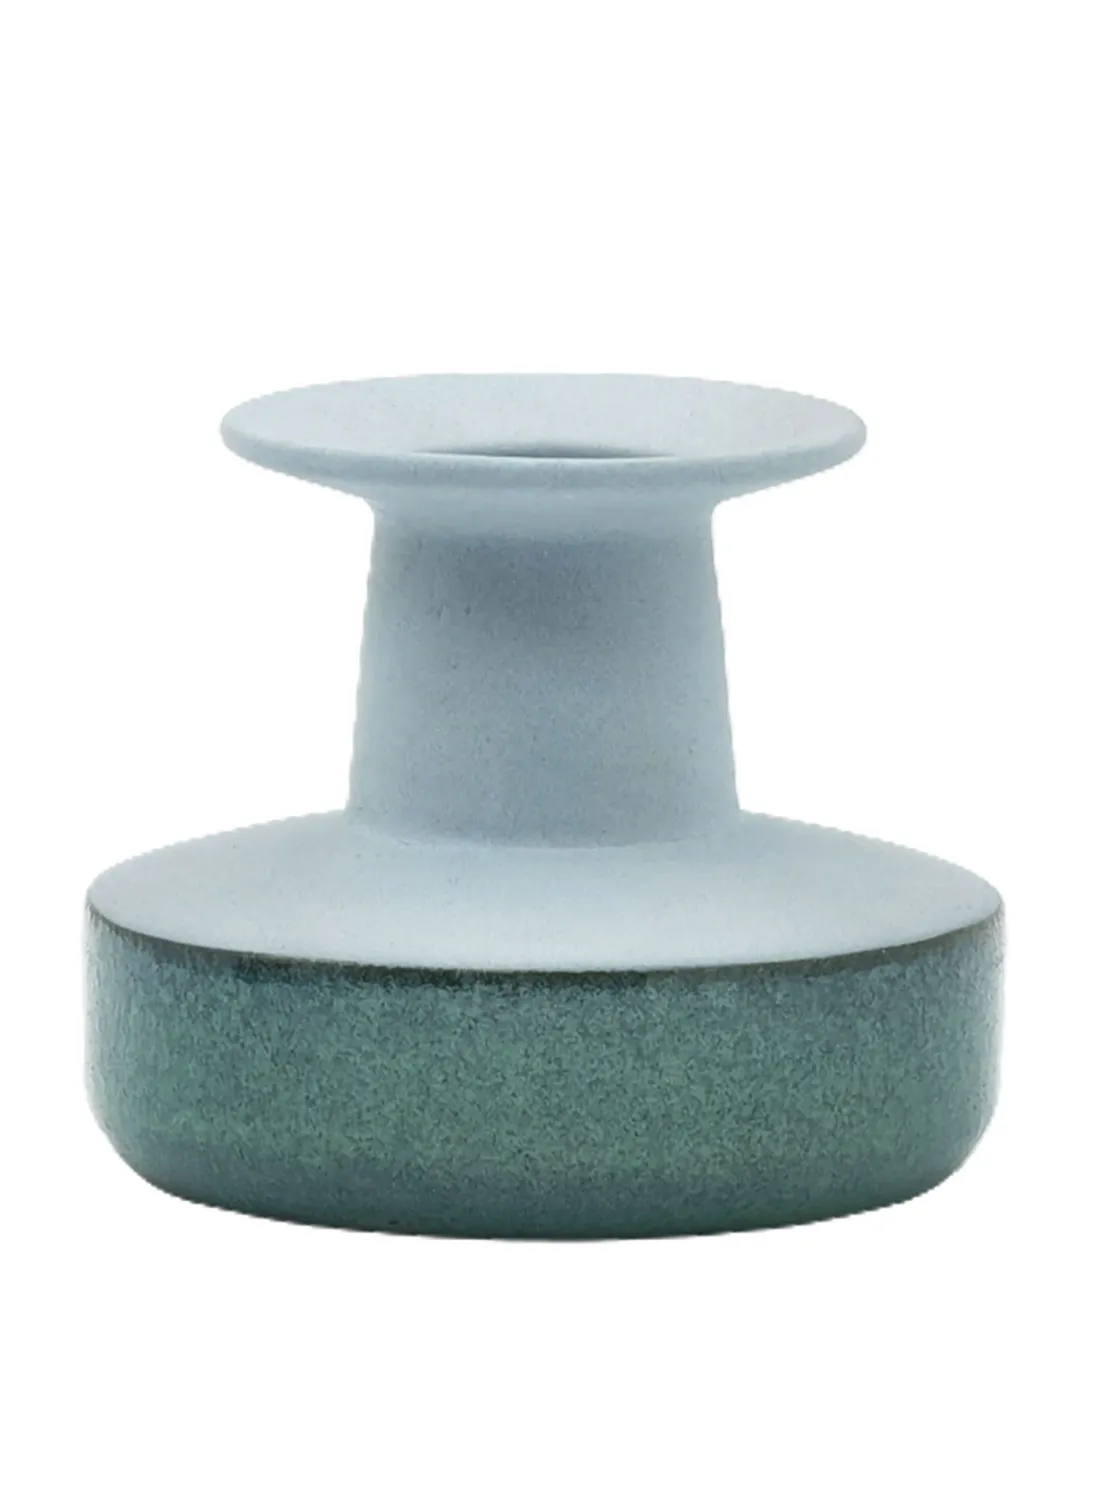 ebb & flow Modern Shape Ceramic Vase Unique Luxury Quality Material For The Perfect Stylish Home N13-032 Blue/Green 14 x 12cm